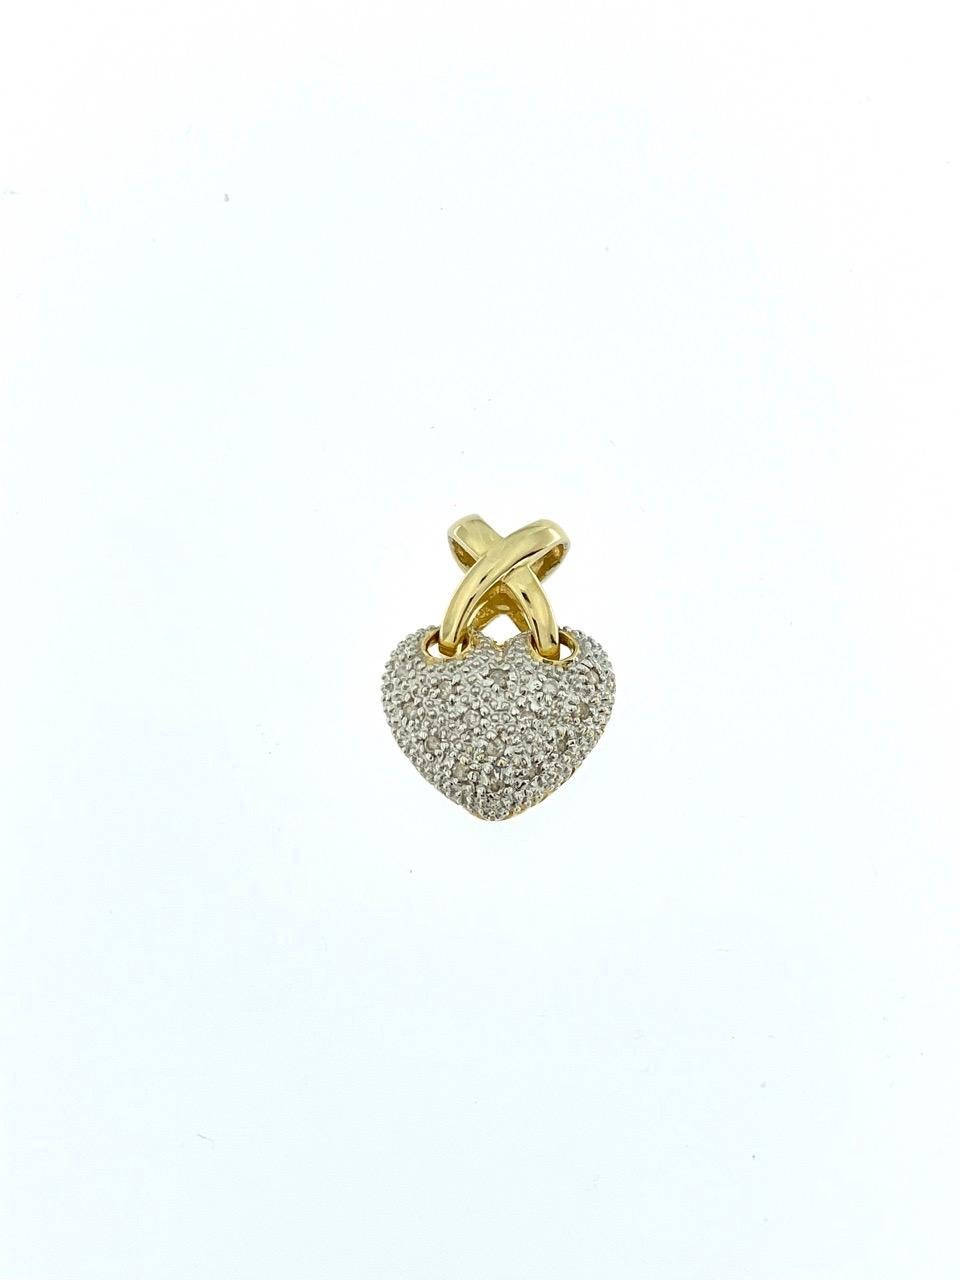 The Heart Pendant in Yellow and White Gold with Diamonds is a stunning and romantic piece of jewelry that combines classic design with luxurious elements. Crafted with precision and elegance, this pendant is a beautiful expression of love and